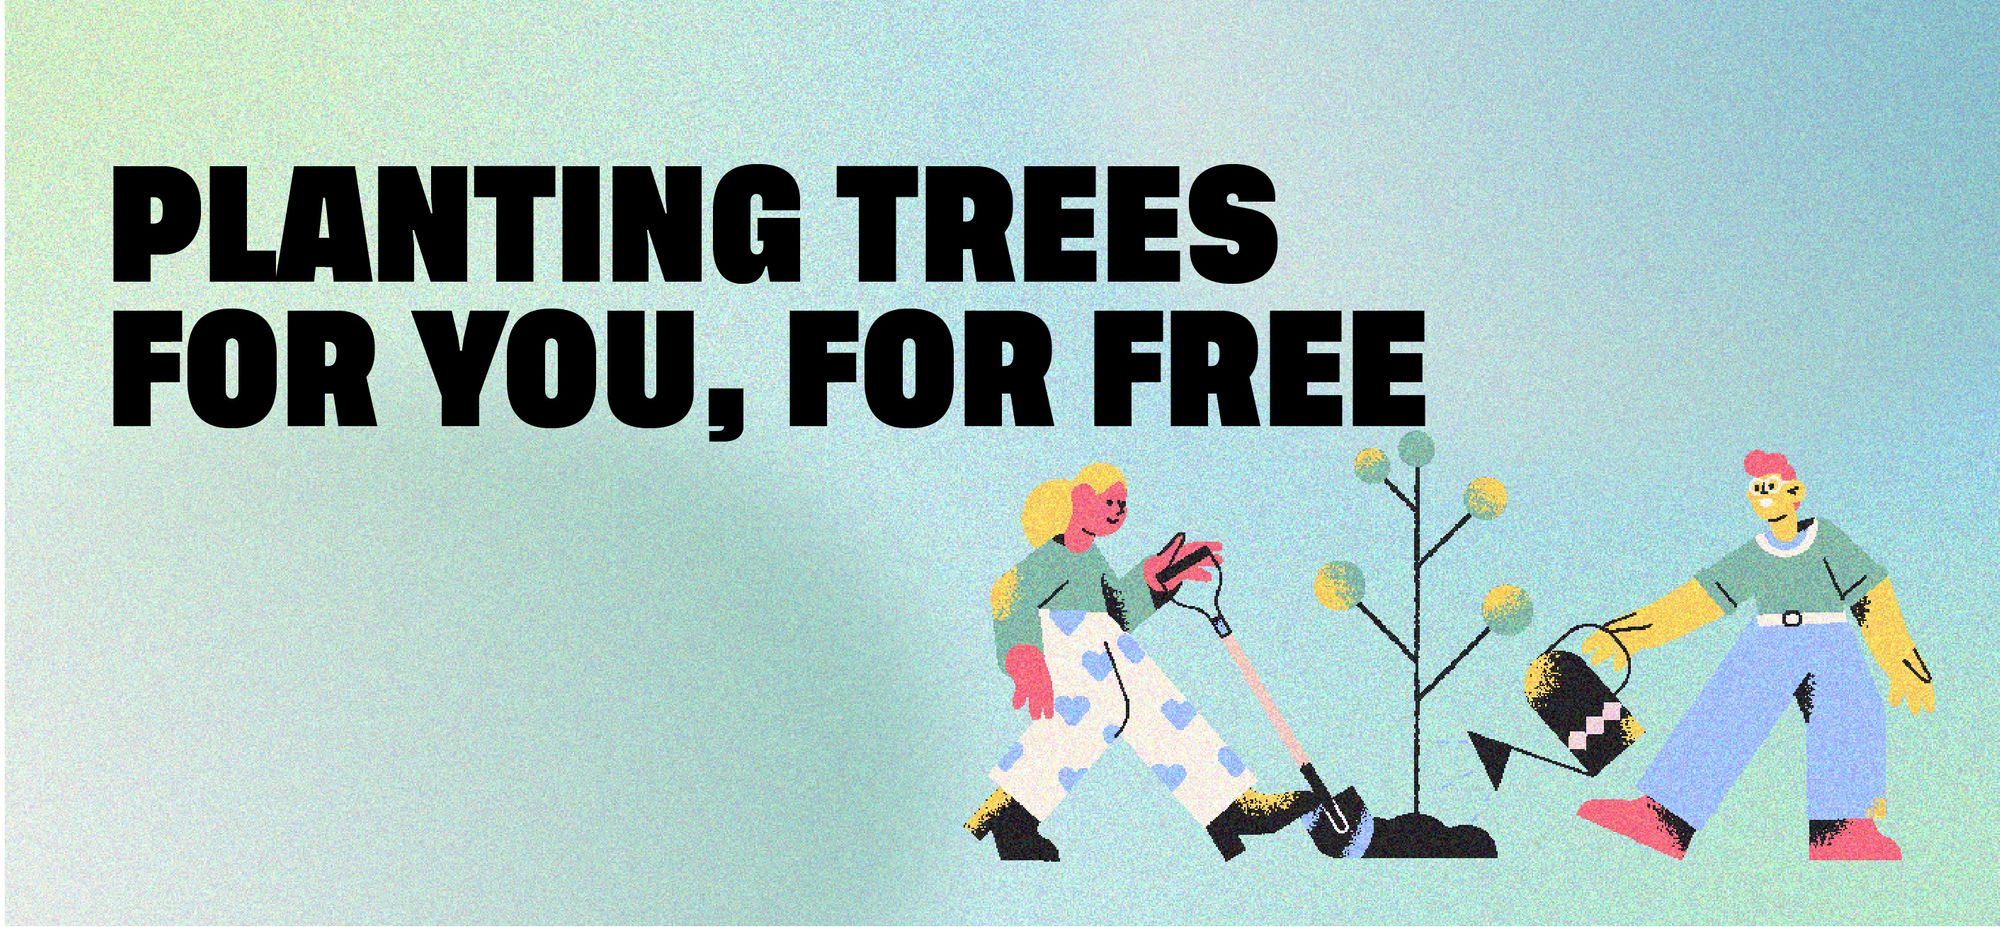 Planting trees for you, for free.